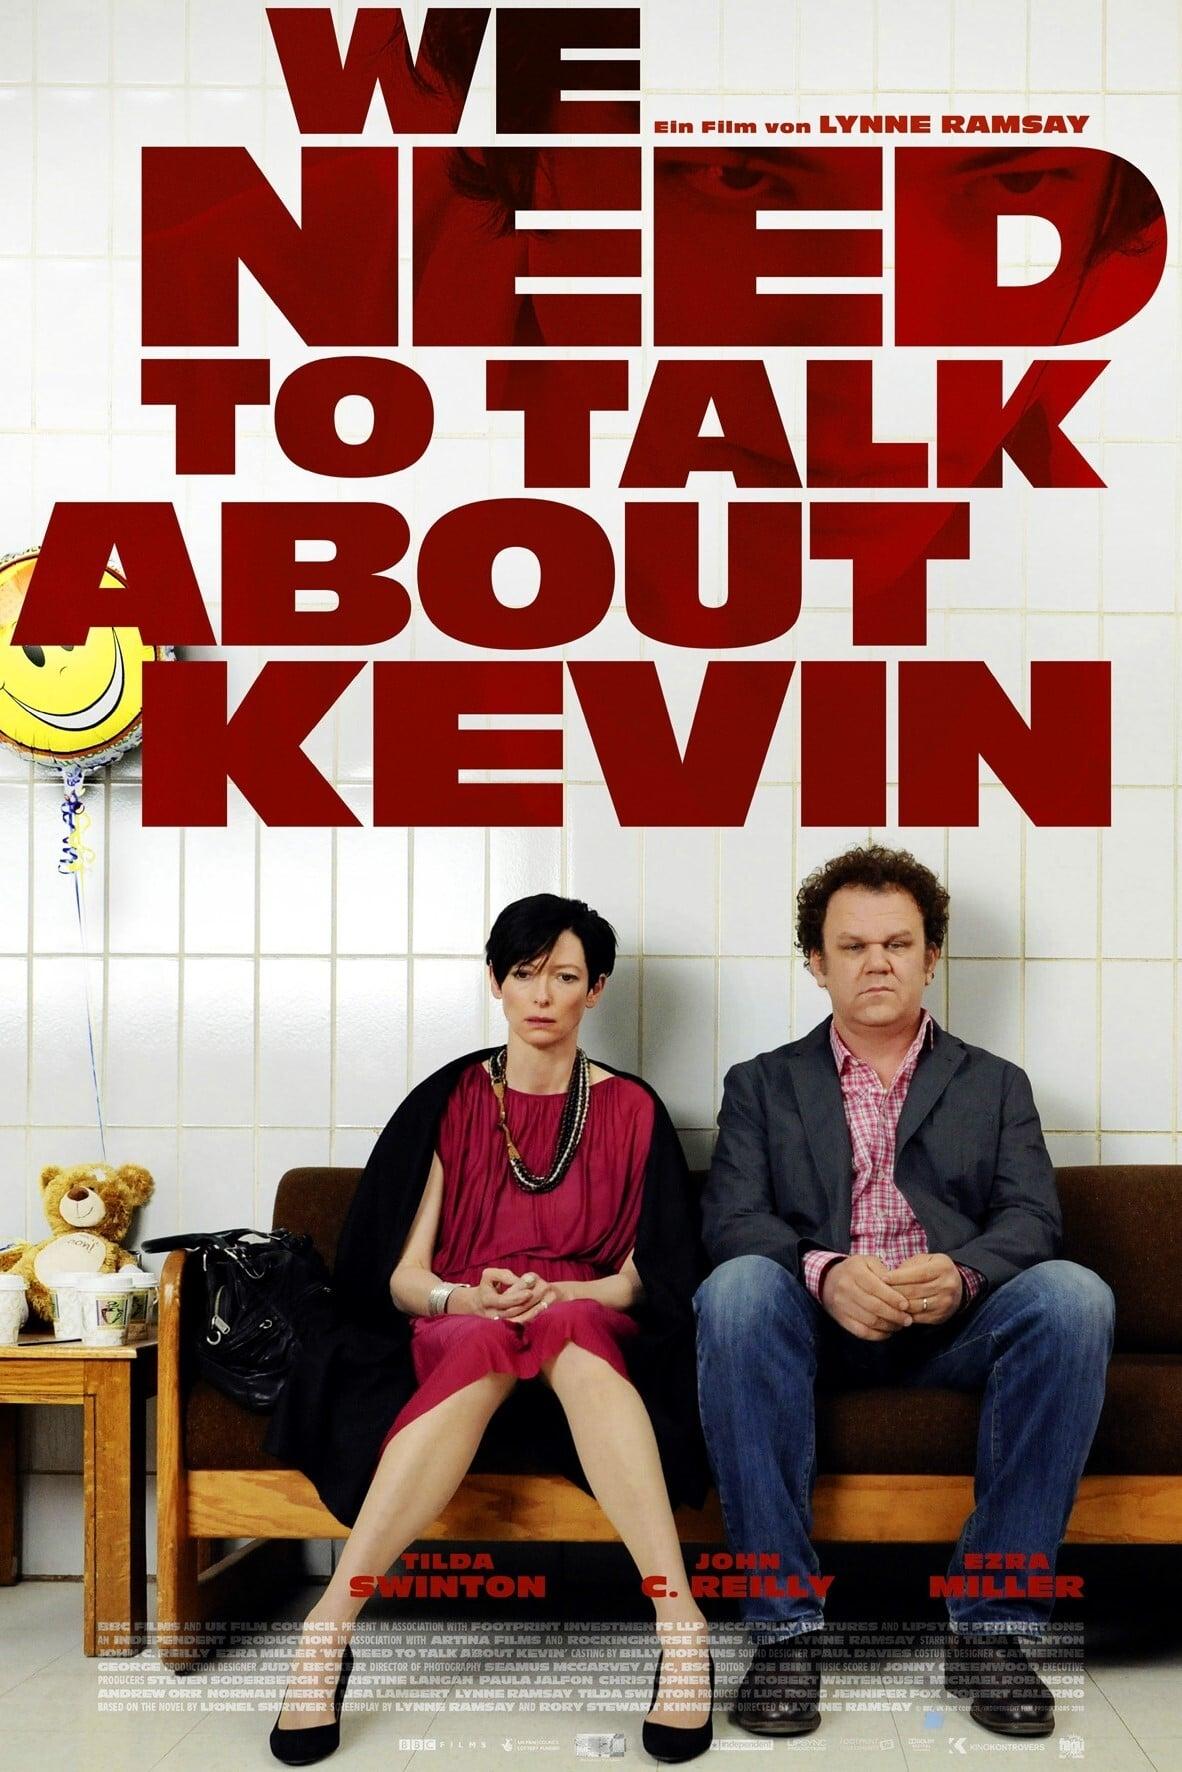 We Need to Talk About Kevin poster